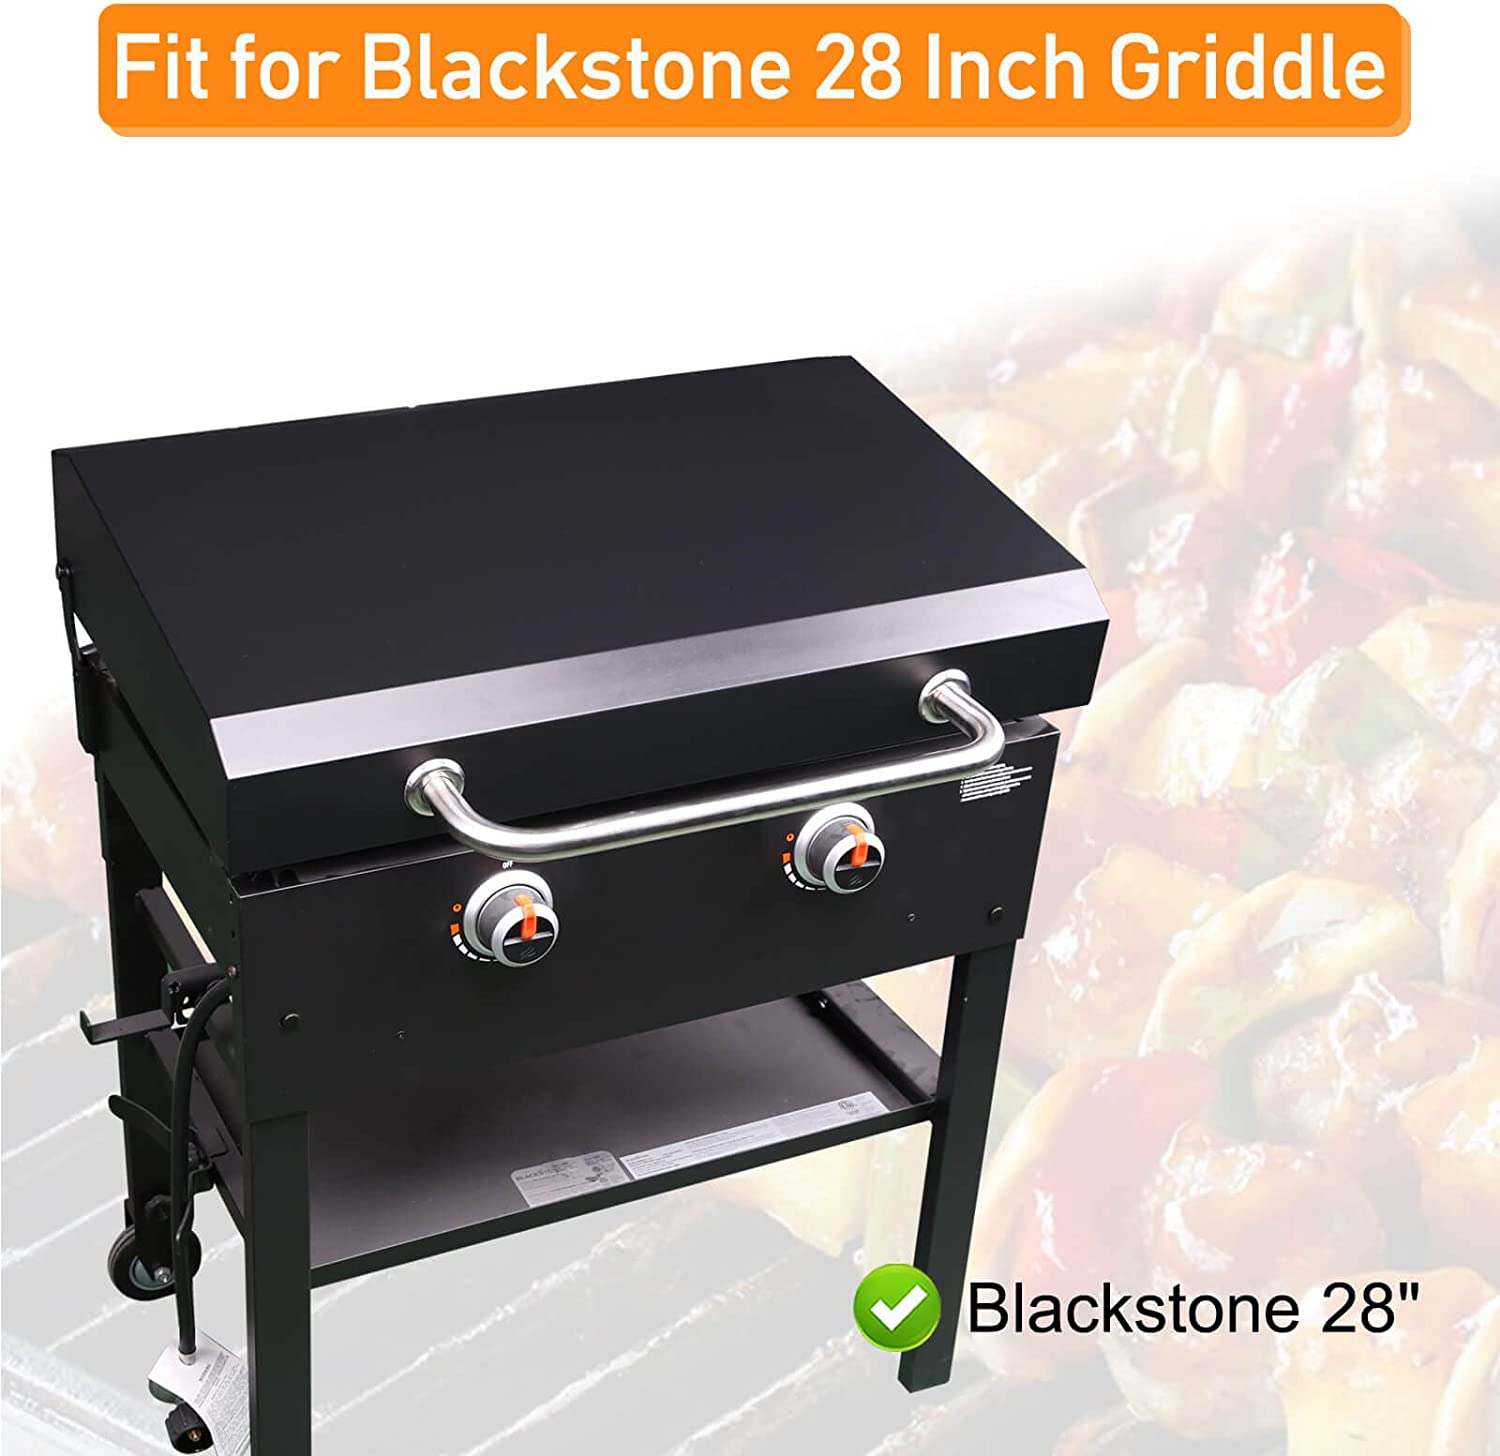 SafBbcue 28 Inch Griddle Hinged Lid for 28 Blackstone Top Griddle